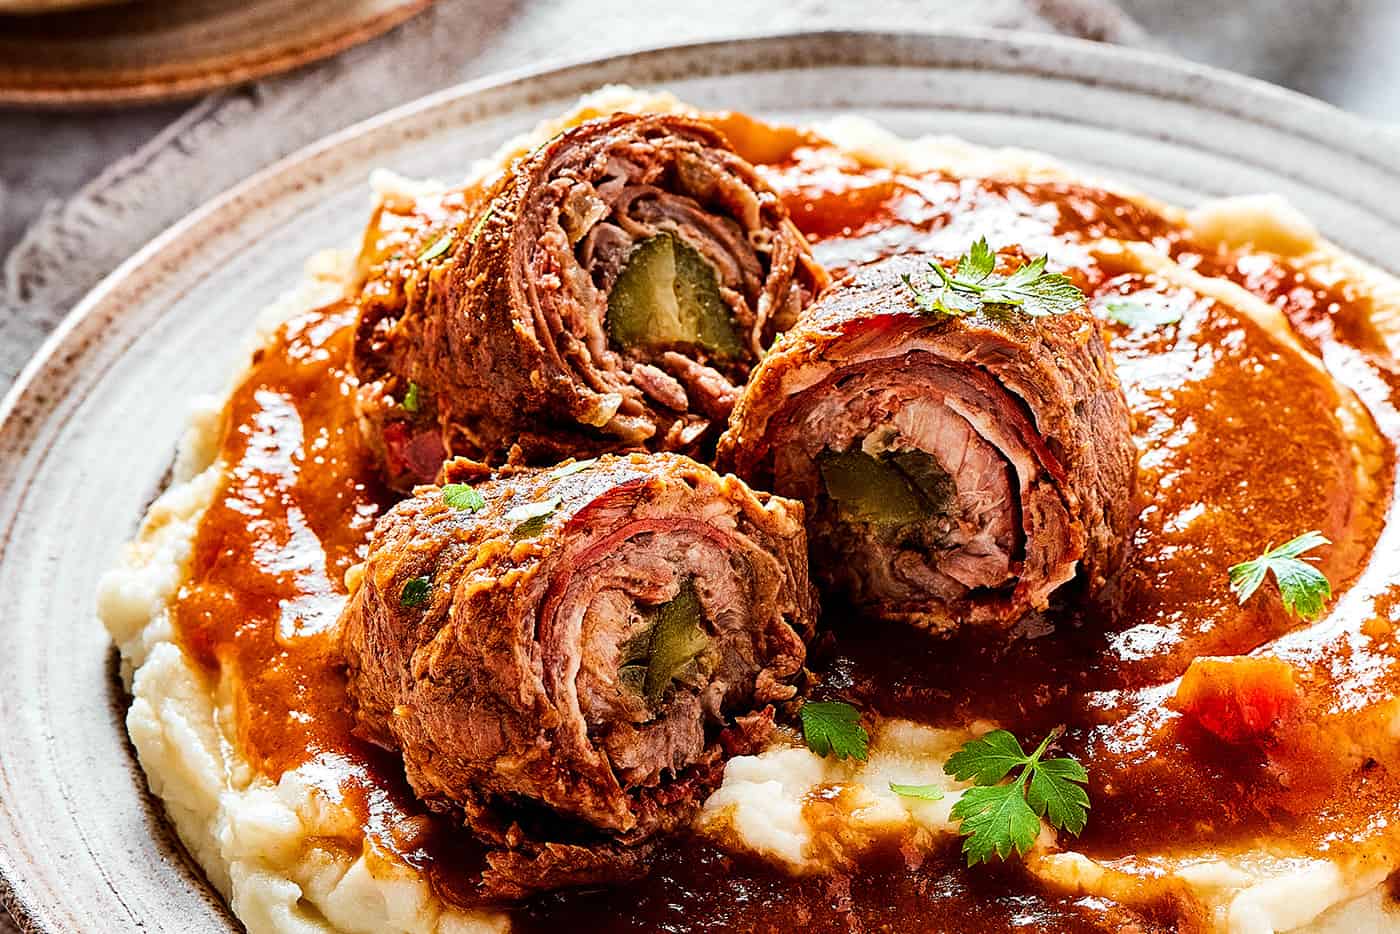 mashed potatoes, gravy, and pieces of rouladen sliced open to reveal the rolled-up interiors